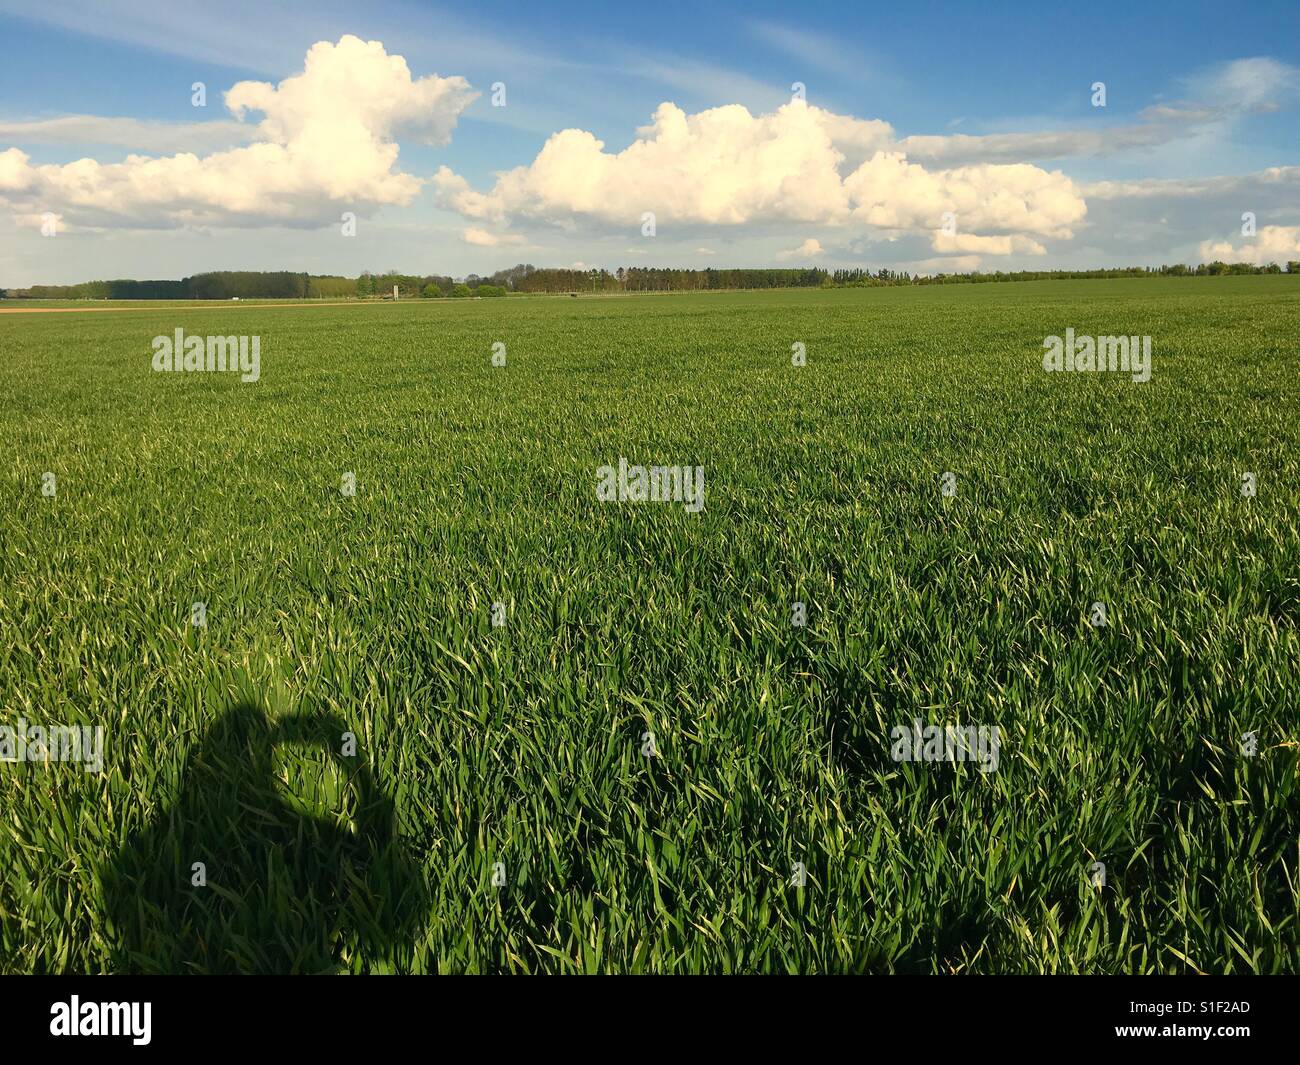 Selfie shadow on field of green wheat with blue sky and fluffy clouds Stock Photo